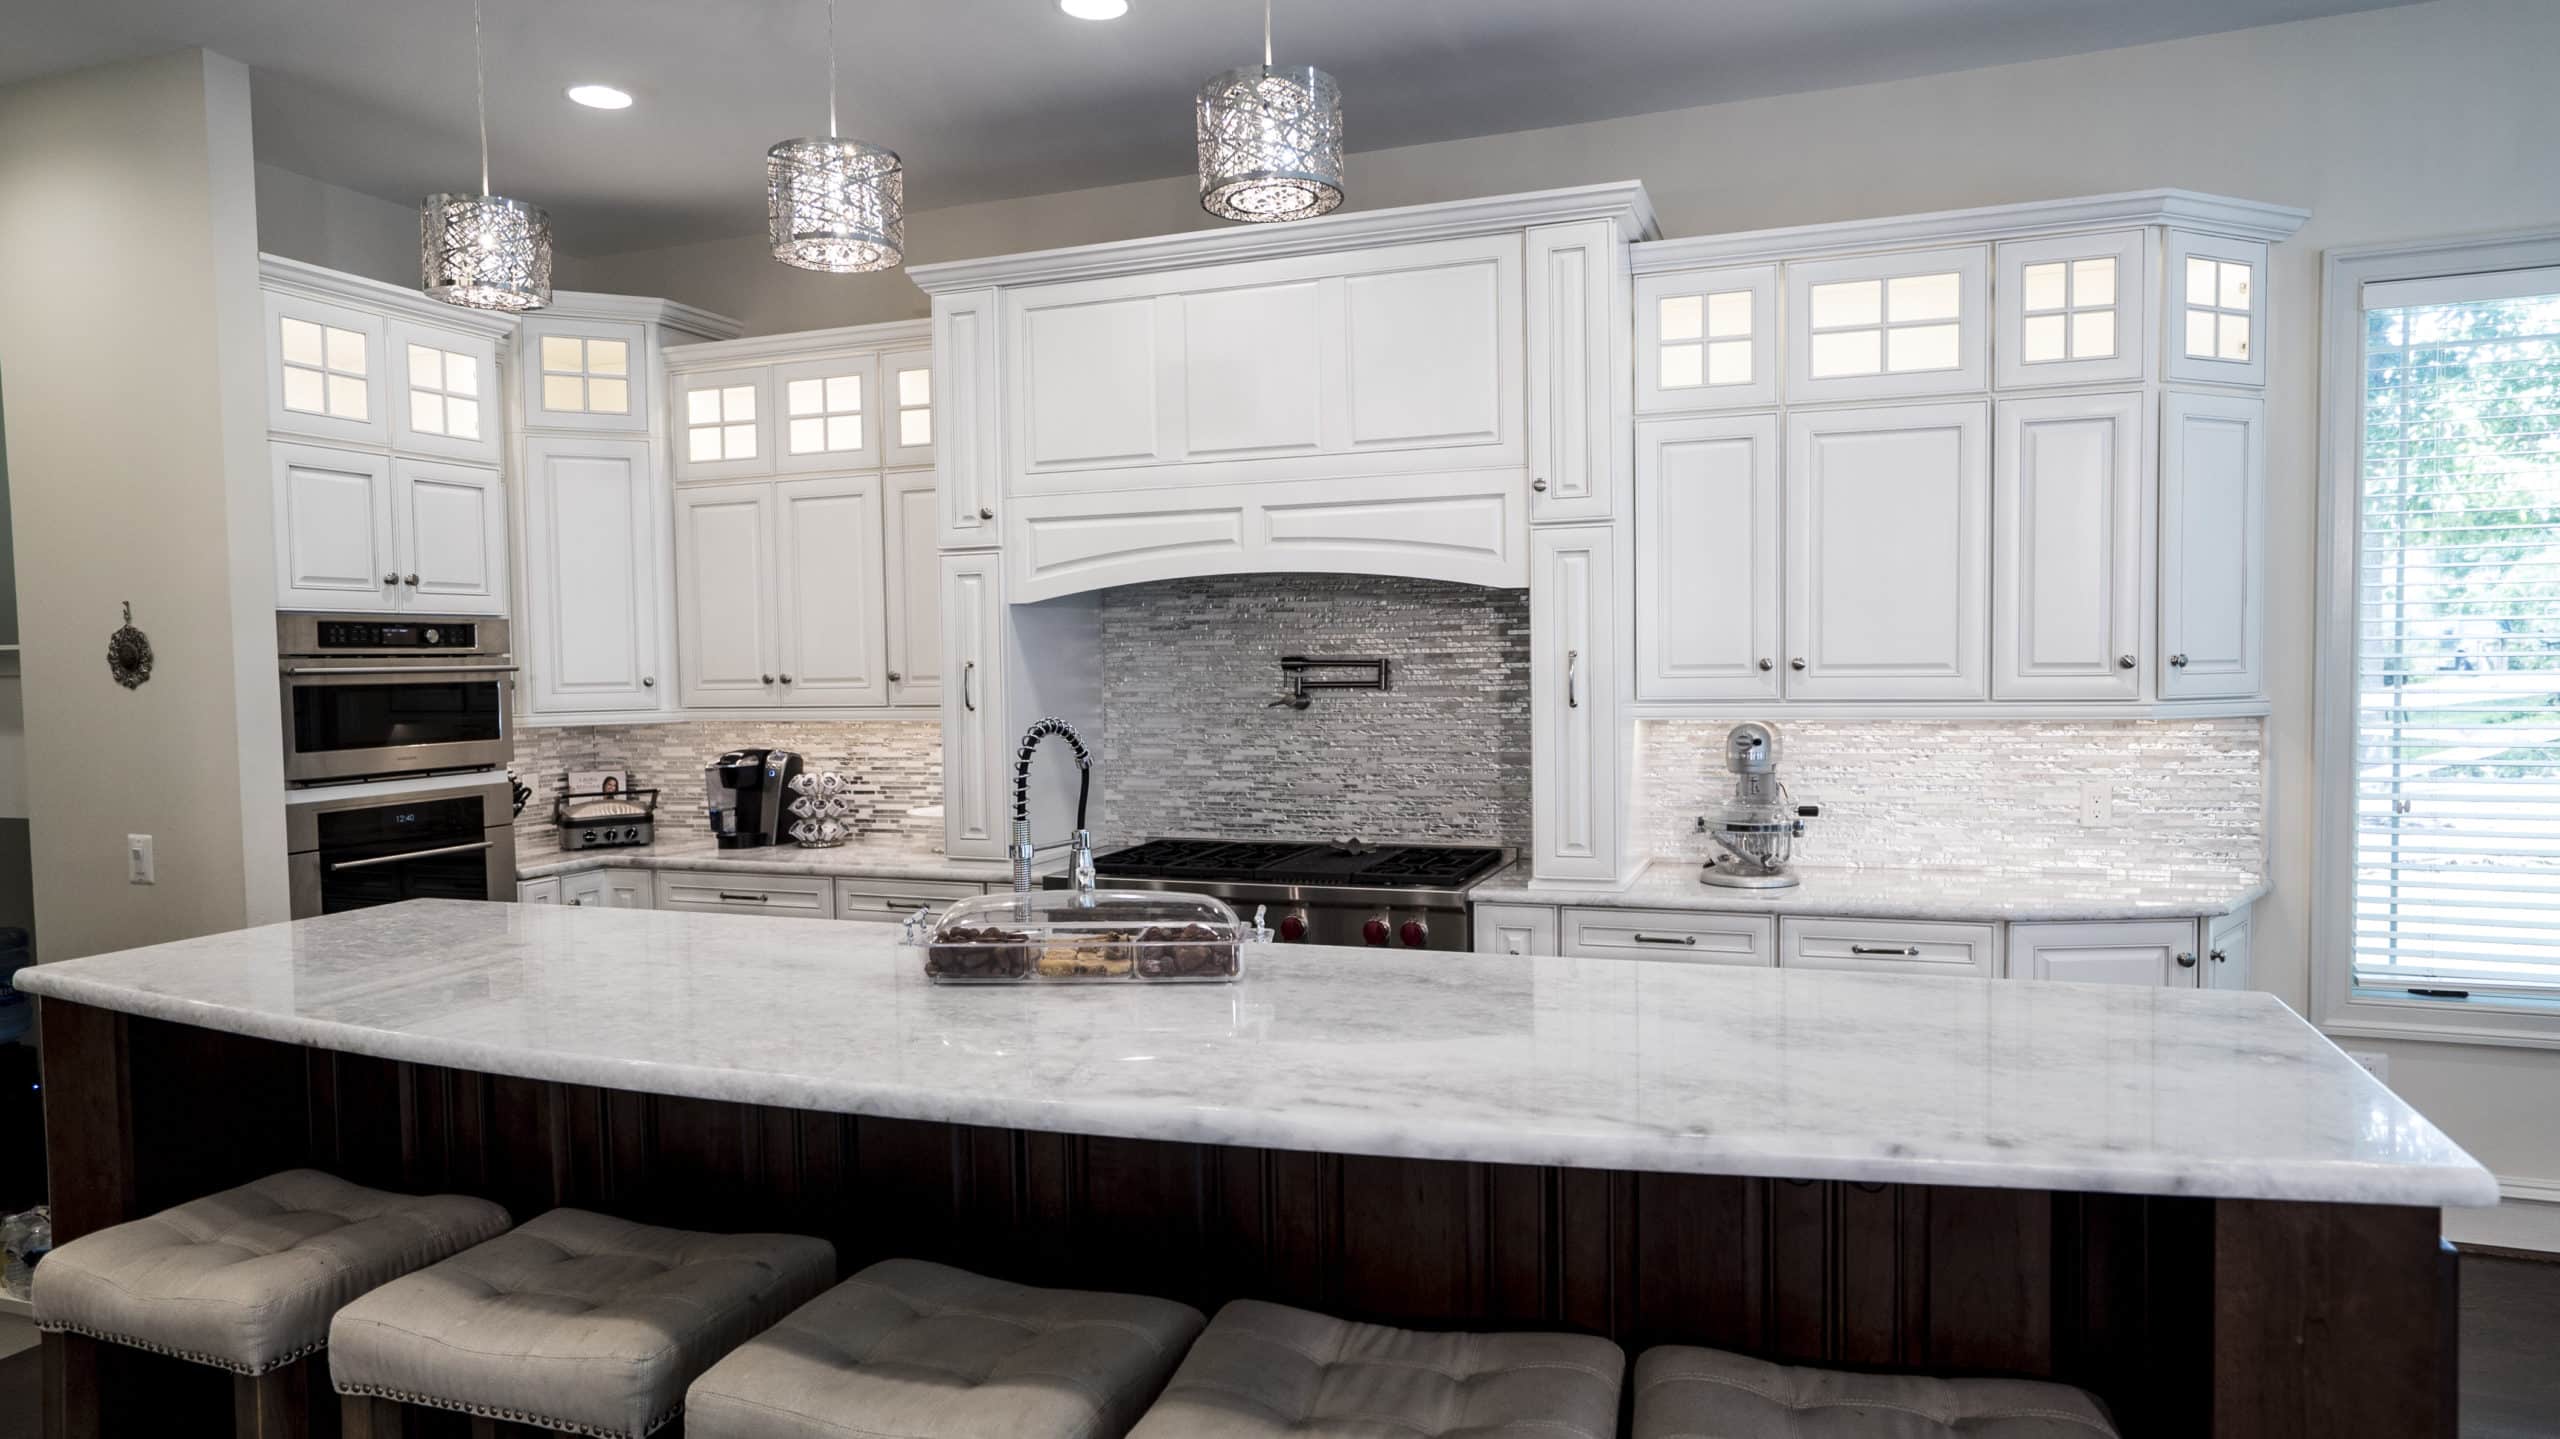 A kitchen with white cabinets and a marble island, creating a sleek and elegant design